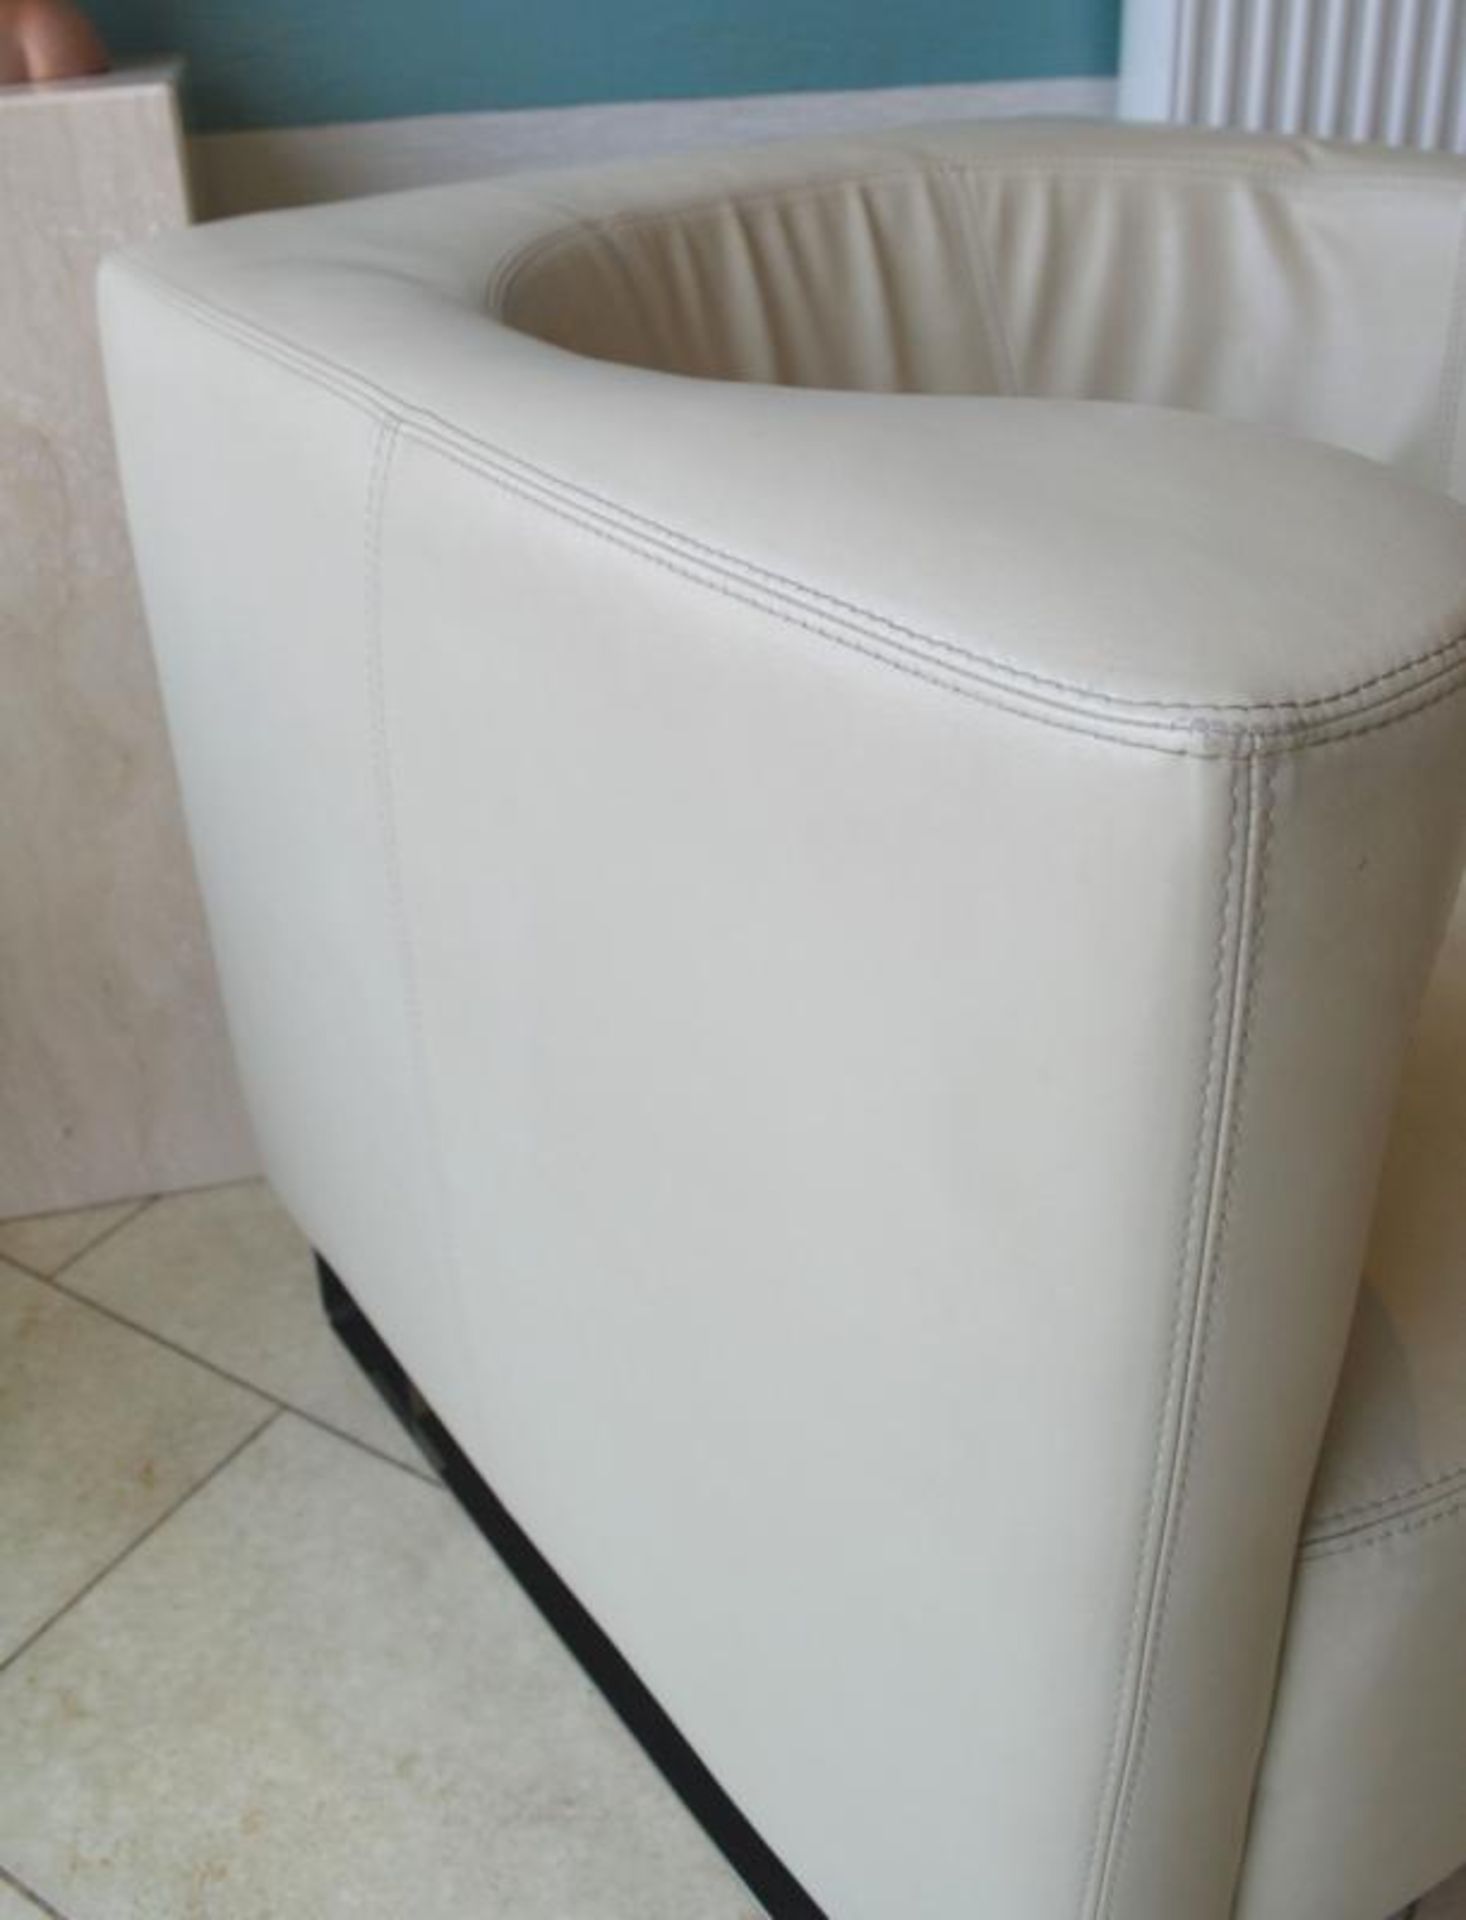 2 x W.Schillig Cream Leather Armchairs - Excellent Condition - CL272 - Location: Burnley BB12 *NO VA - Image 9 of 11